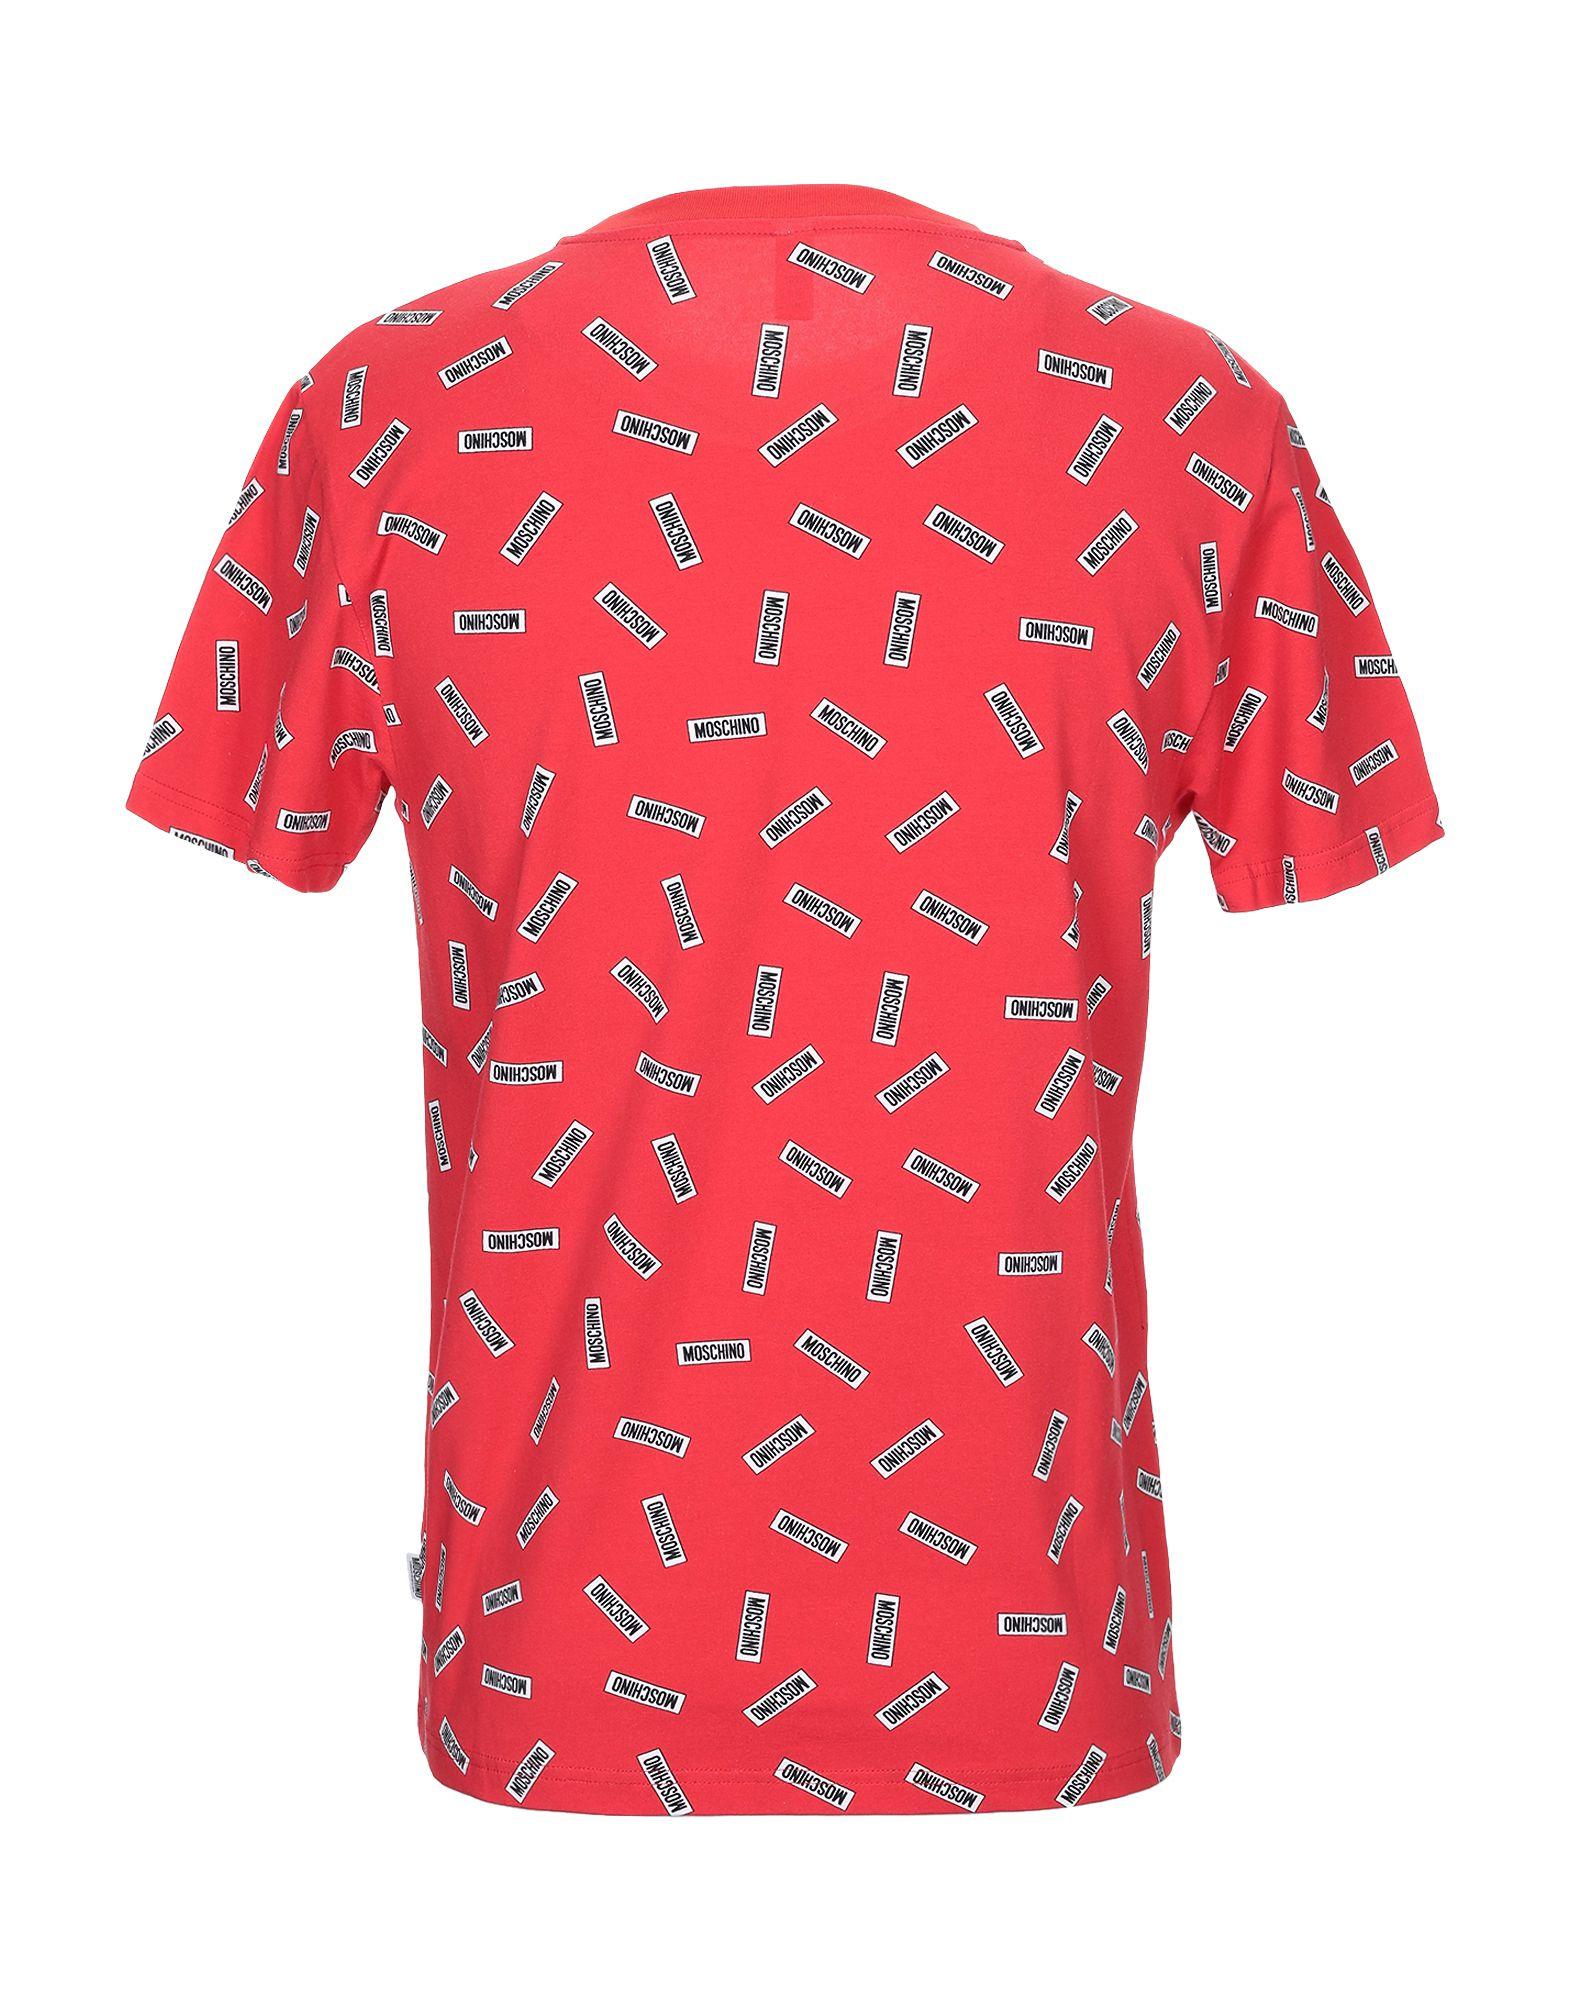 Moschino Cotton Undershirt in Red for Men - Lyst